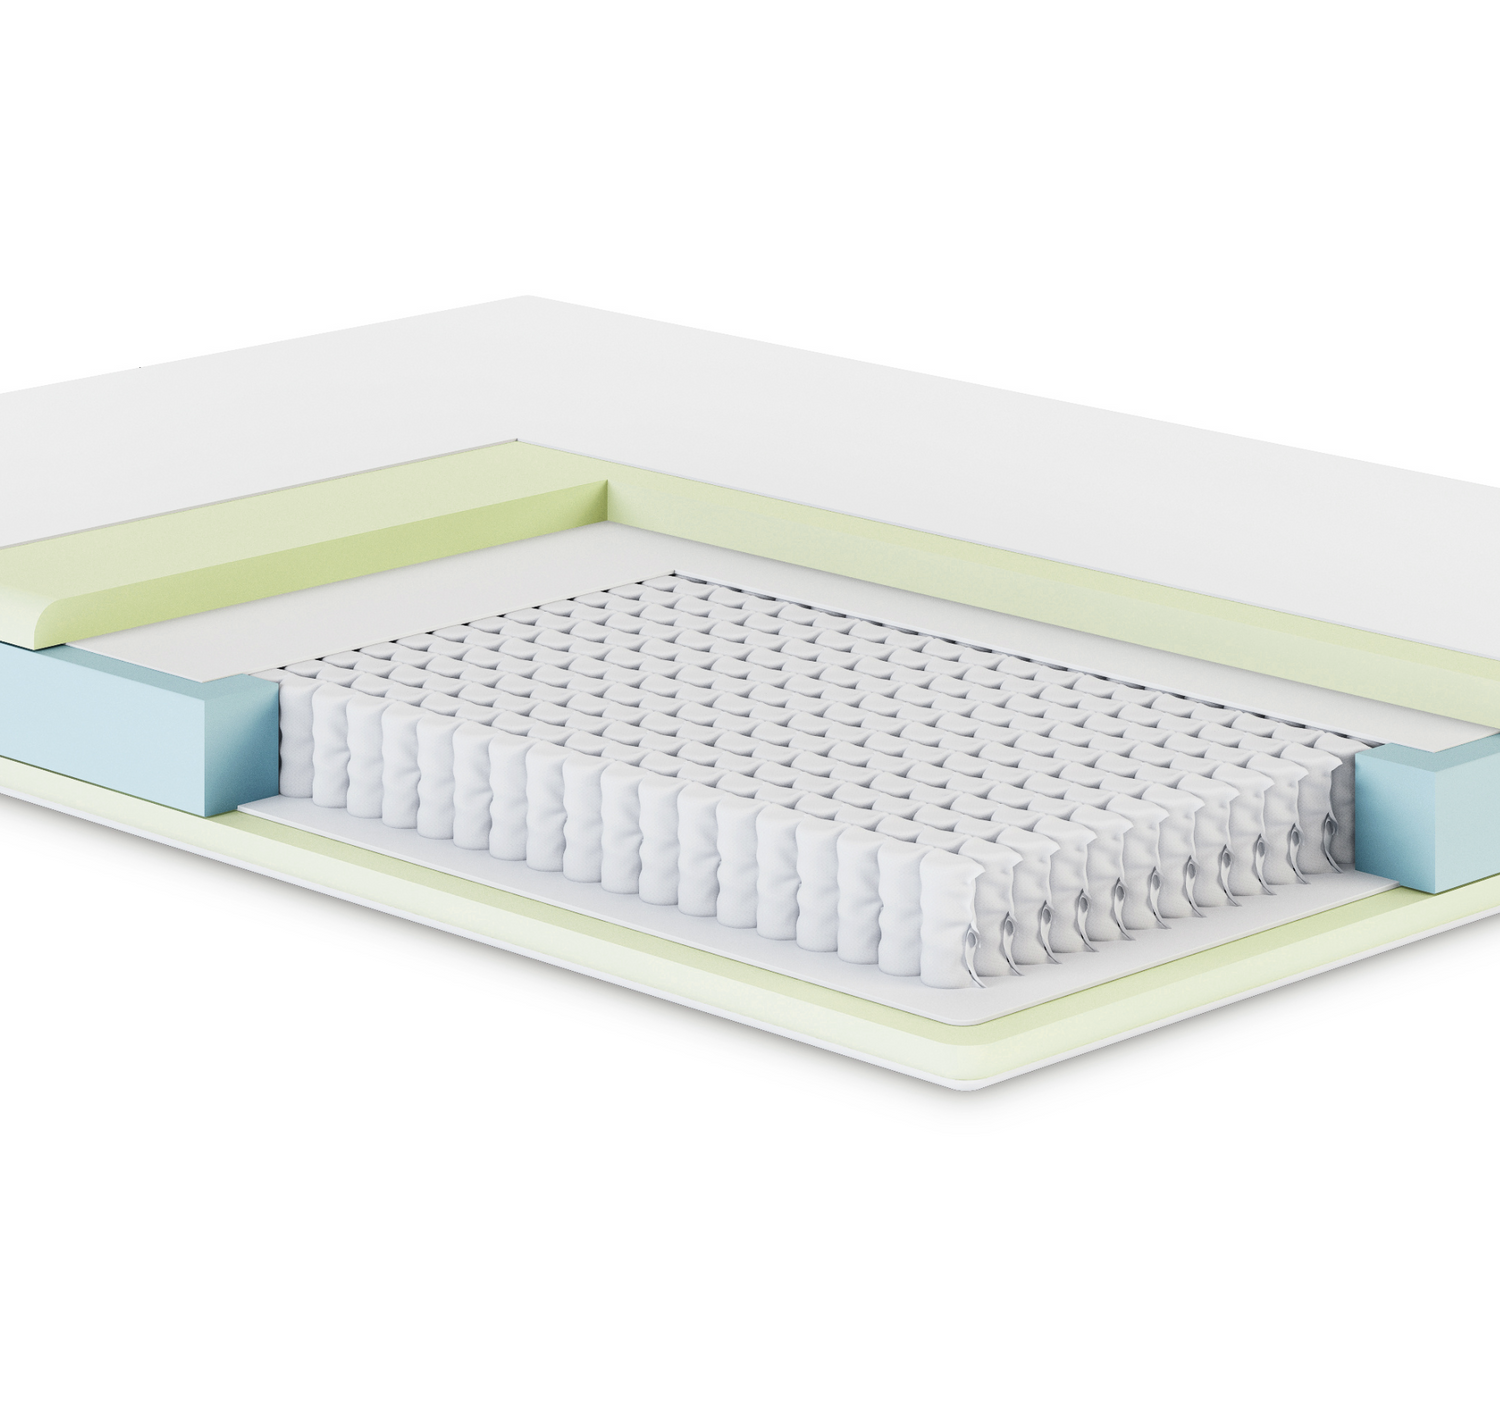 Vector graphic of a pocket-sprung mattress with a cutaway view, displaying its internal structure featuring memory foam layers for enhanced comfort and pocket springs for support.